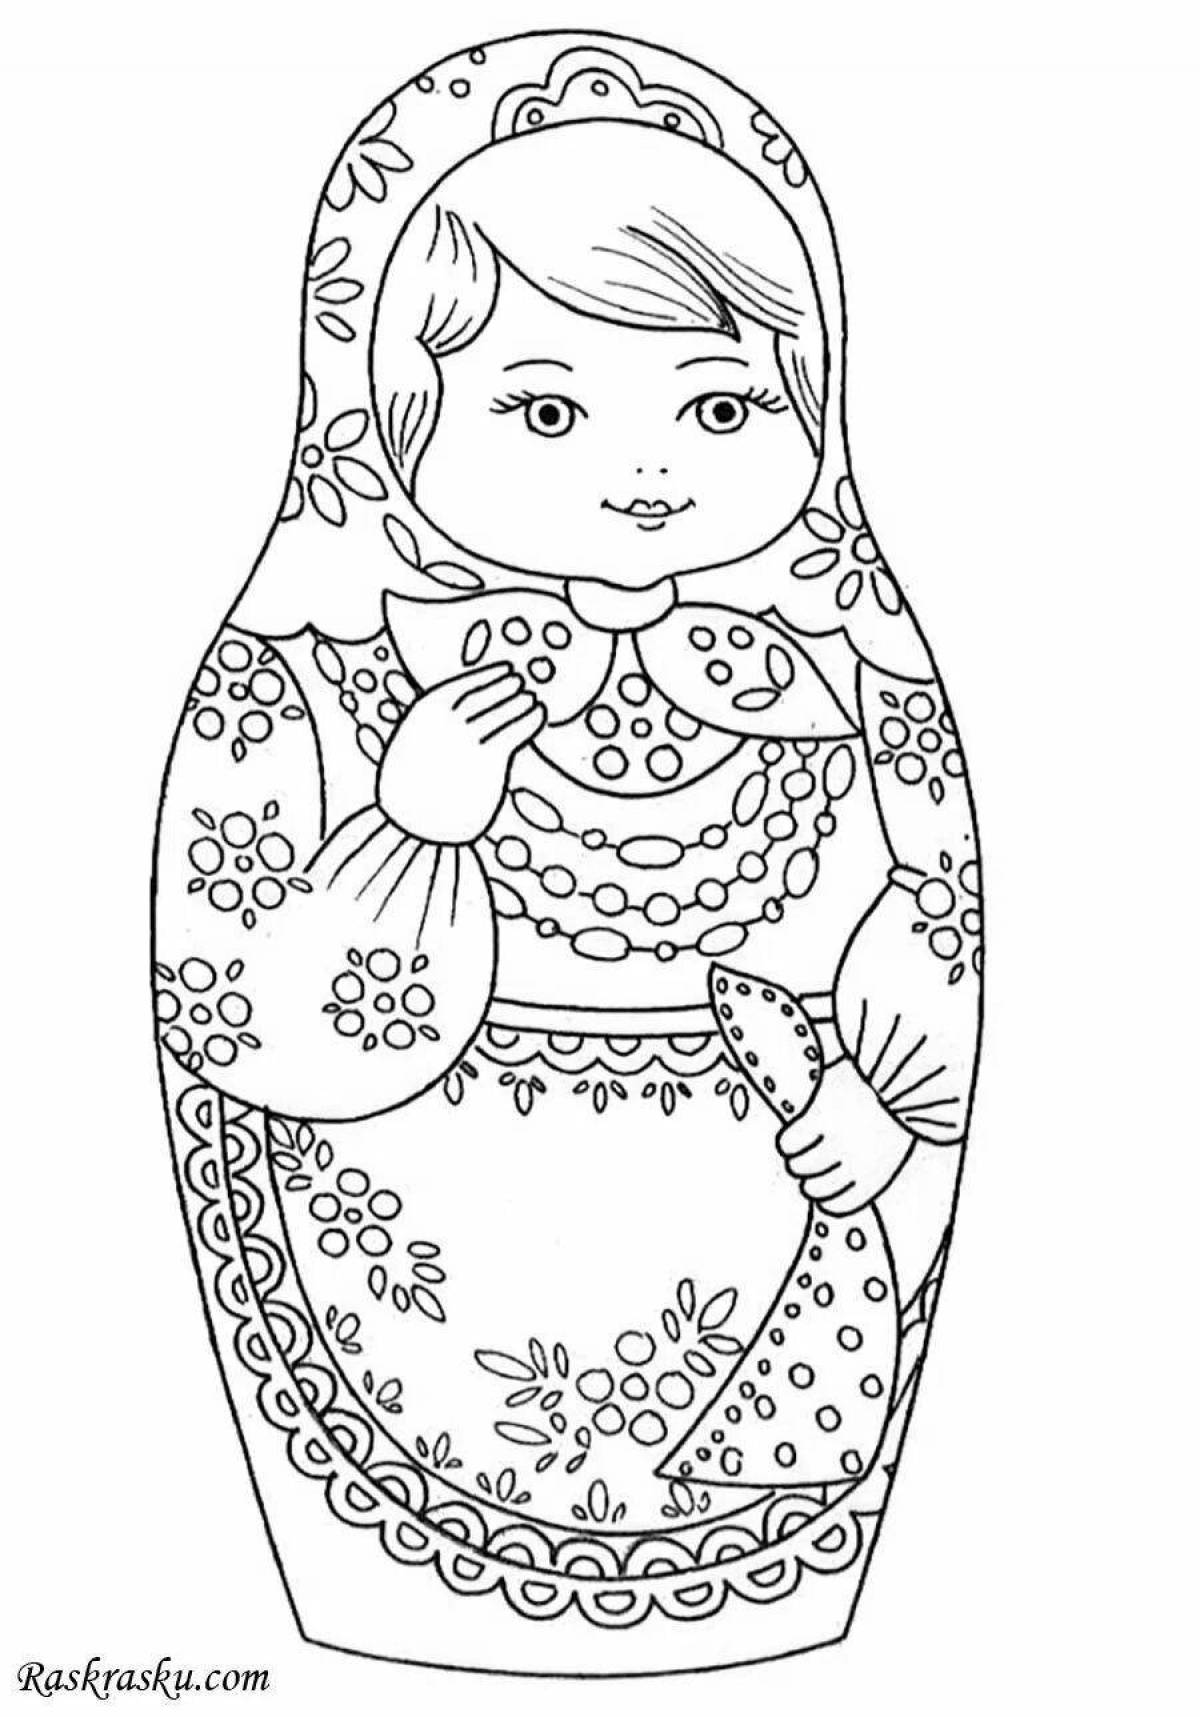 Amazing Russian folk coloring book for kids